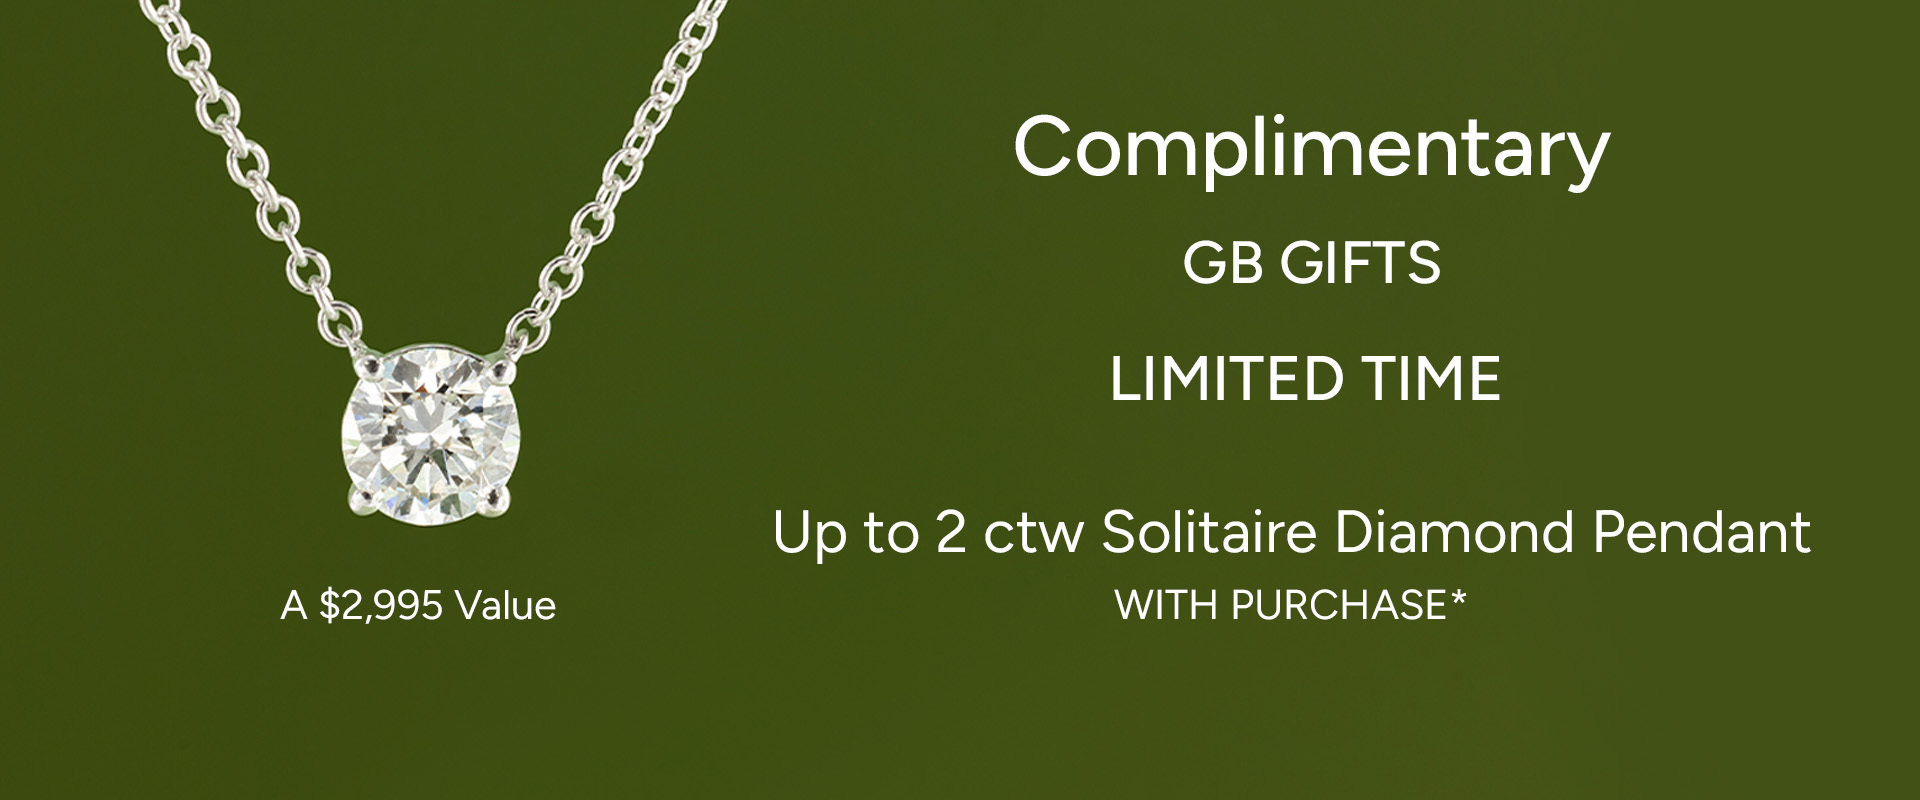 Complimentary GB Gifts